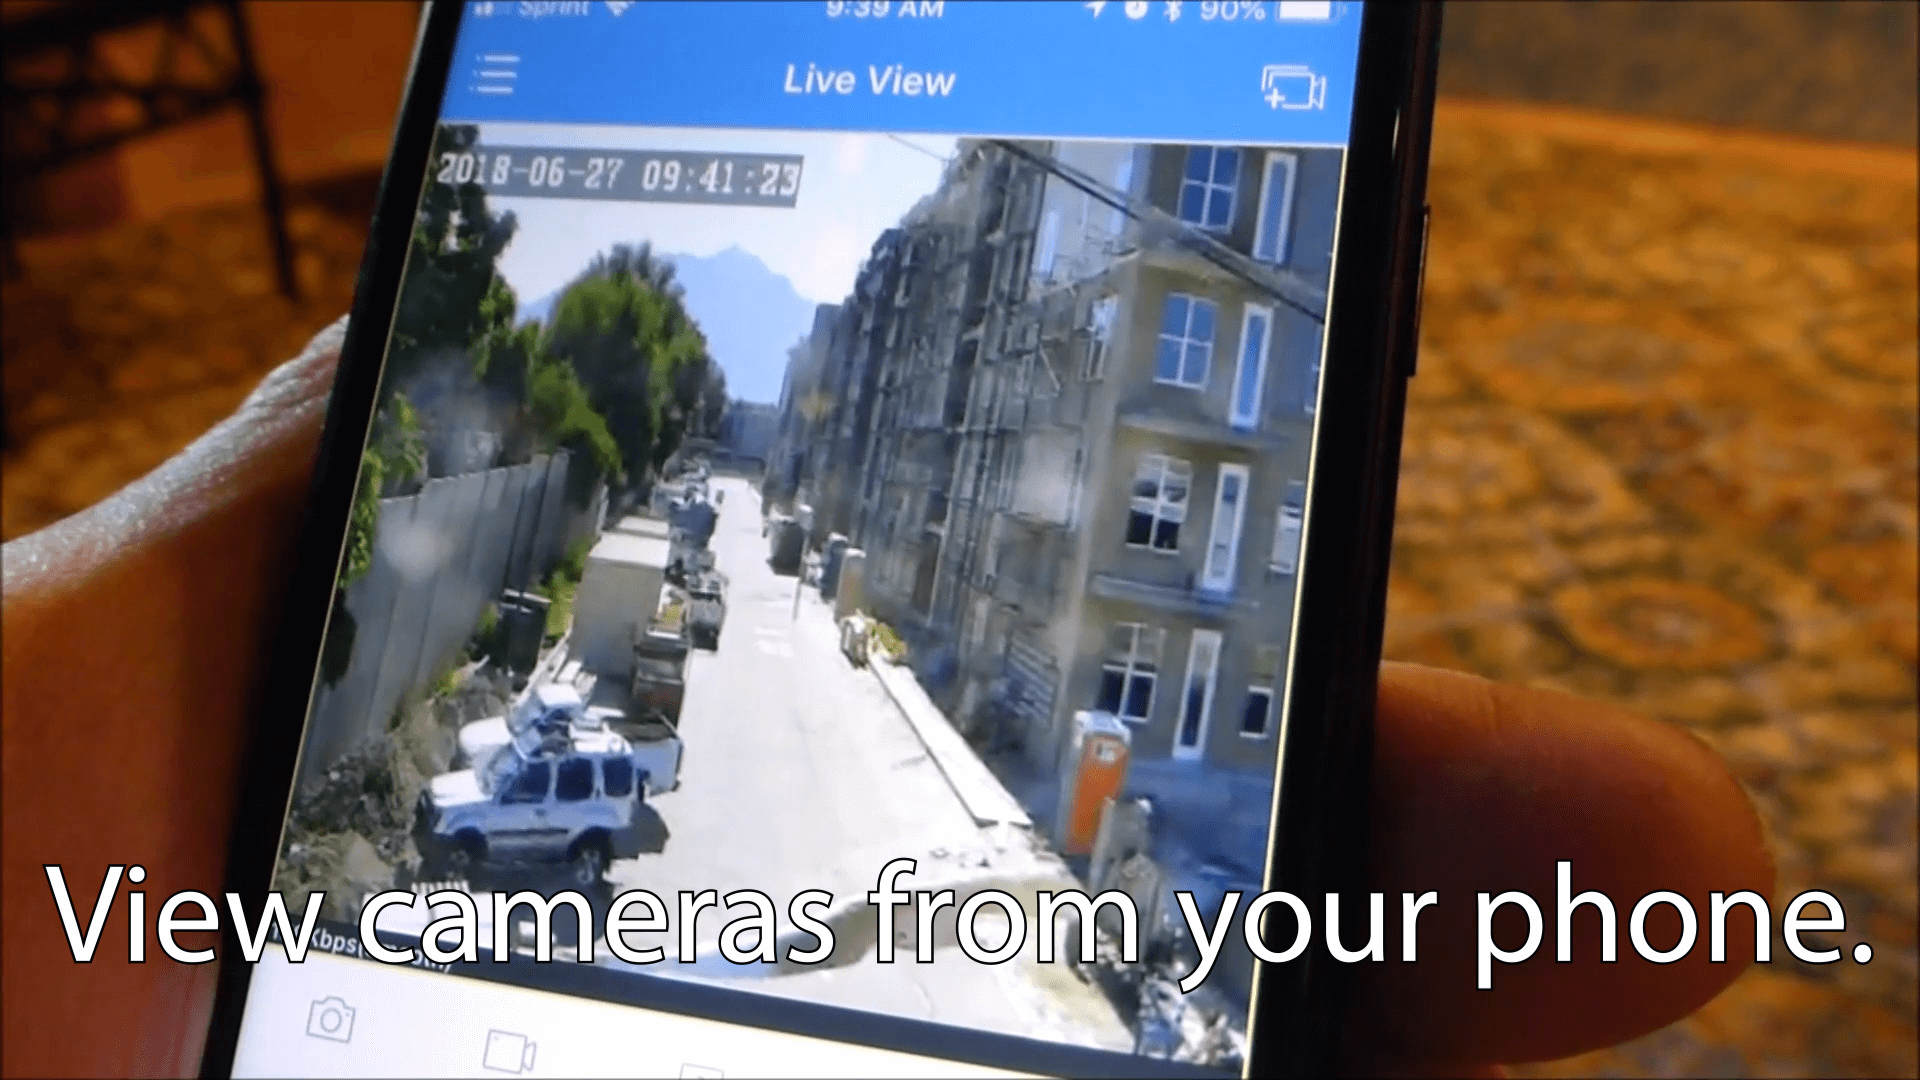 View cameras from your phone